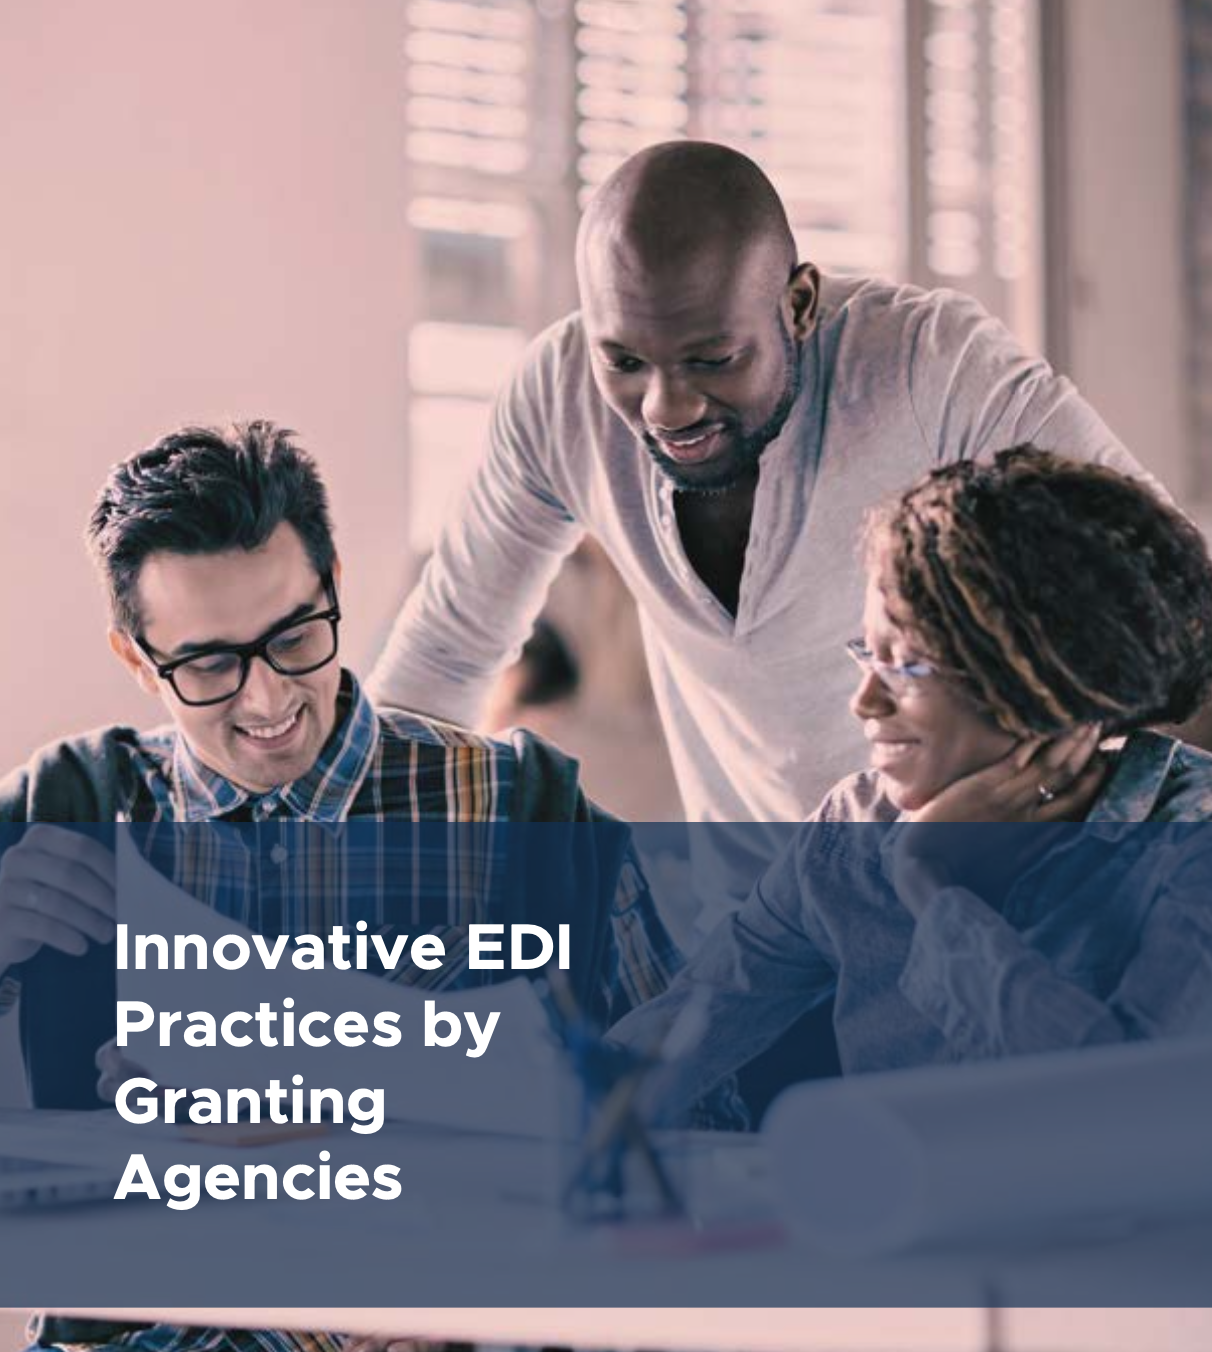 Innovative EDI Practices by Granting Agencies, by RIQEDI  